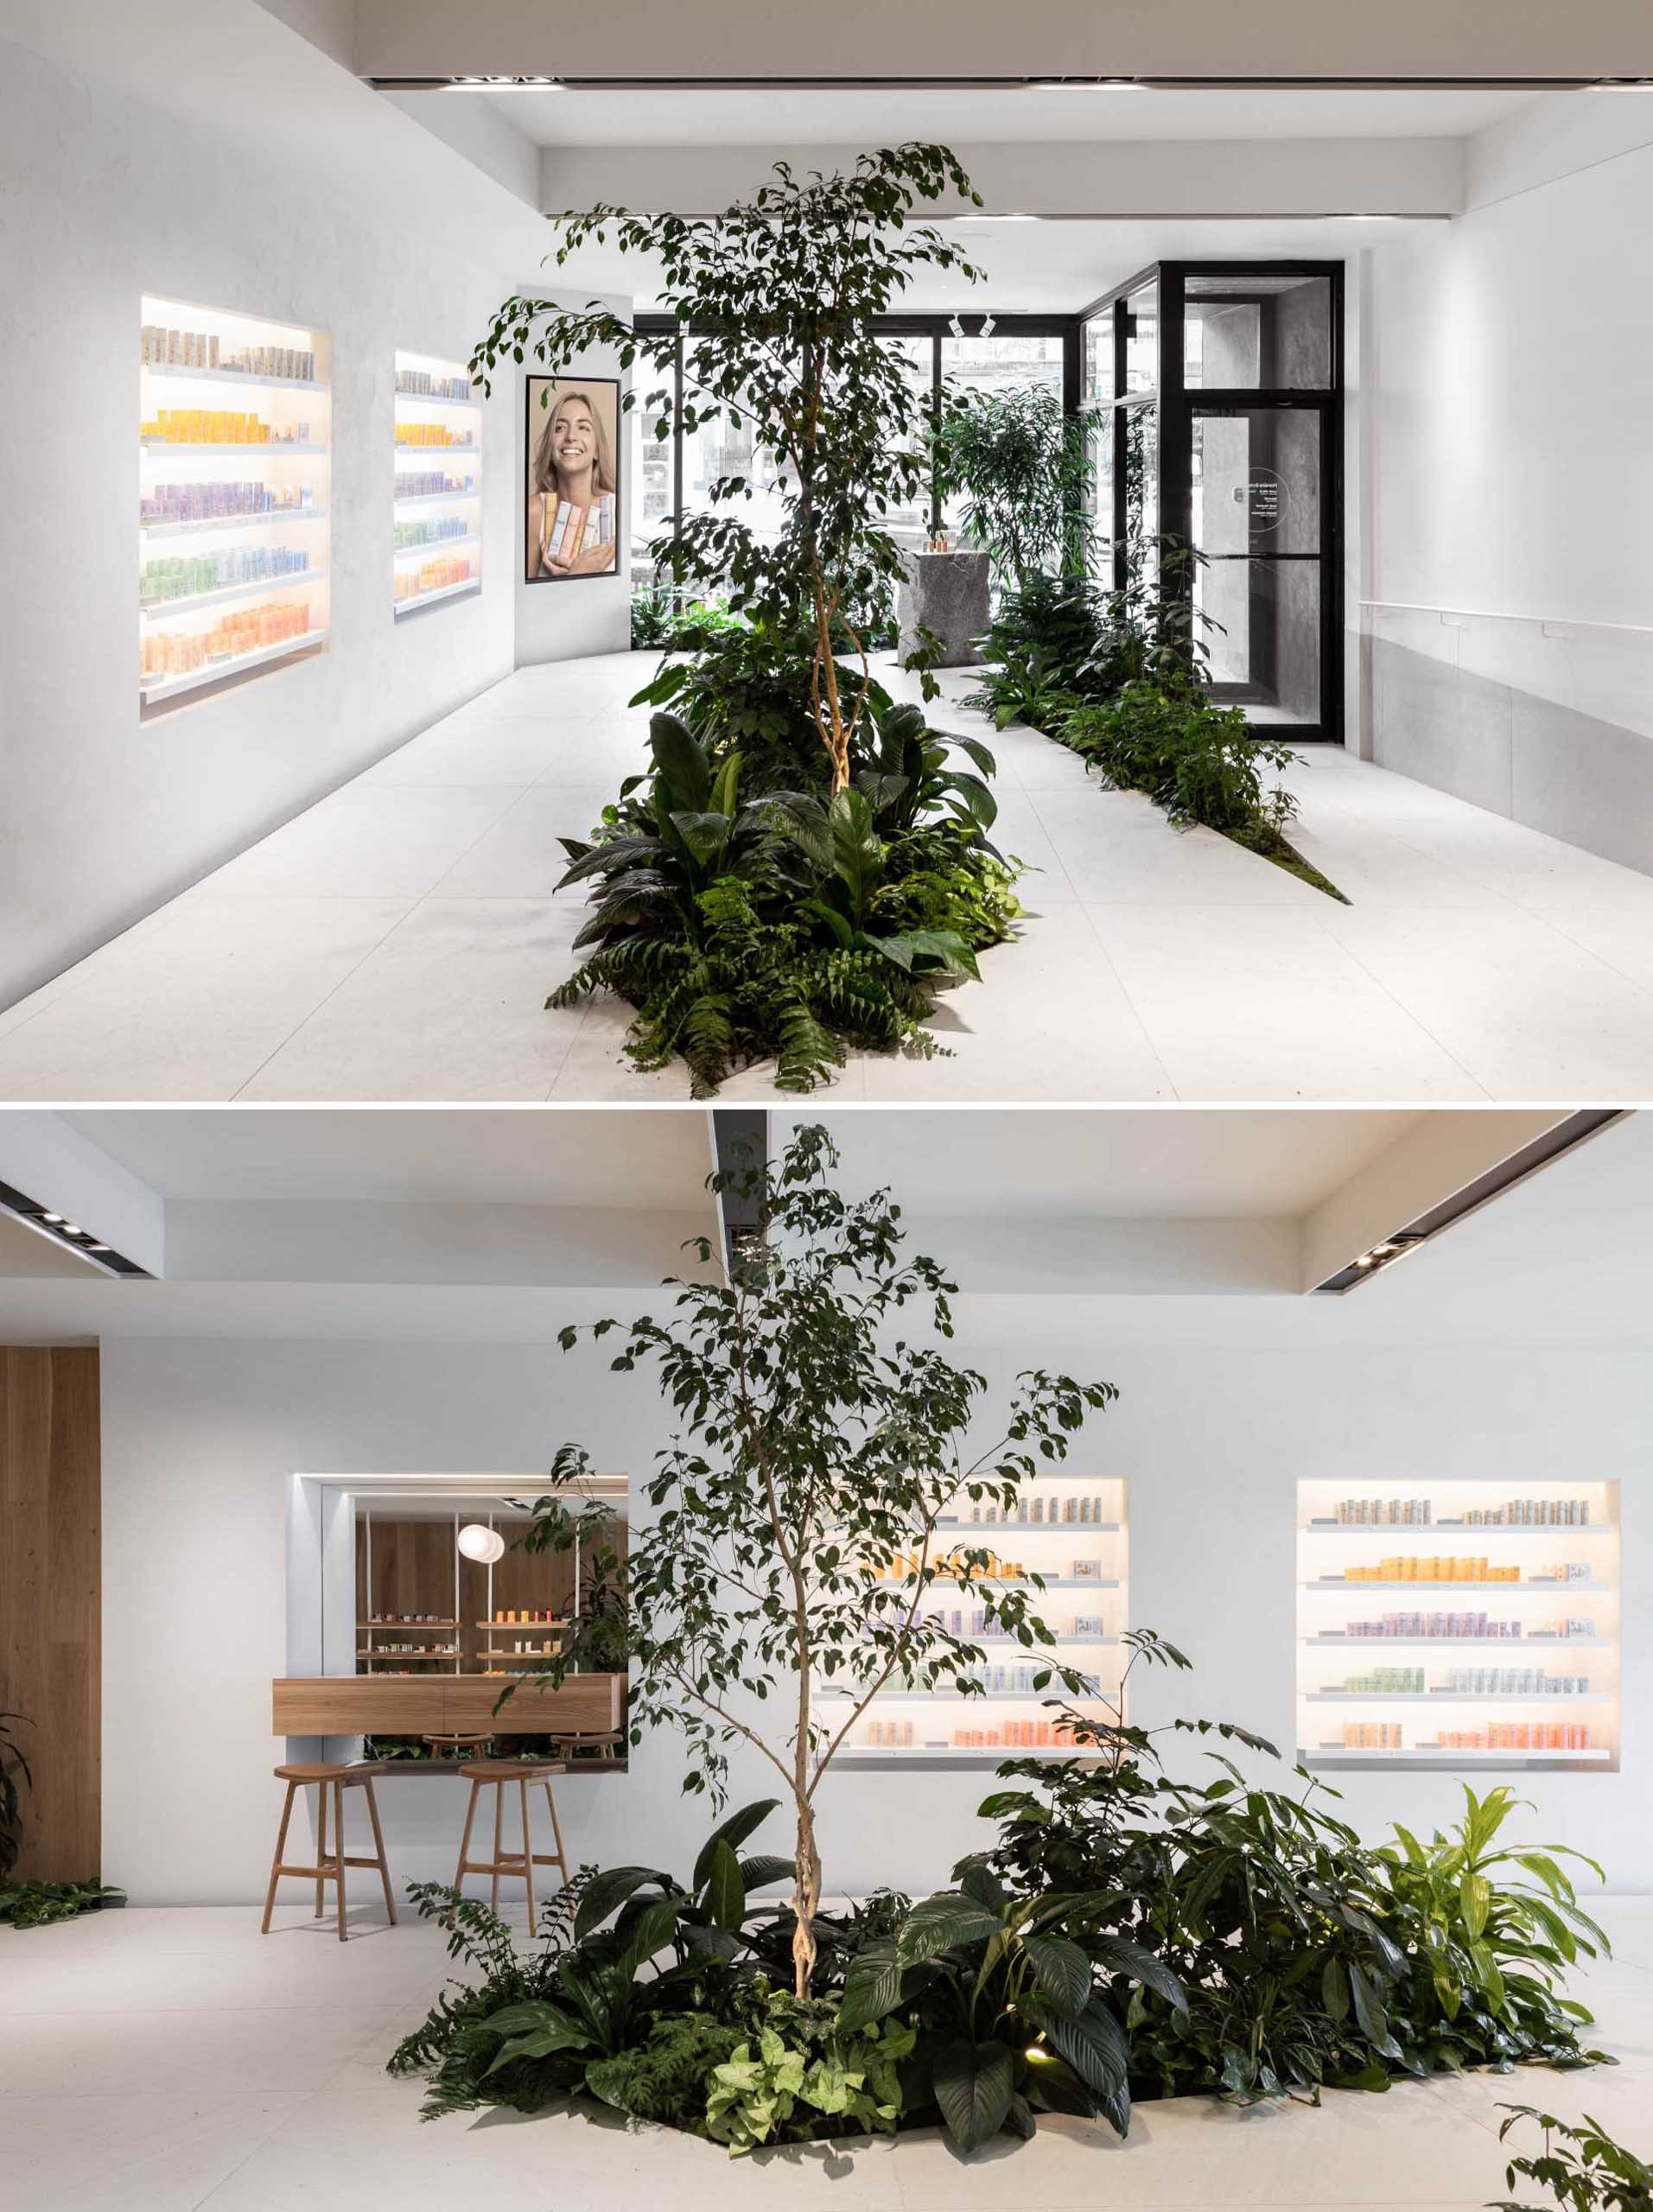 A modern retail store for a beauty brand includes built-in planters and stone accents throughout.